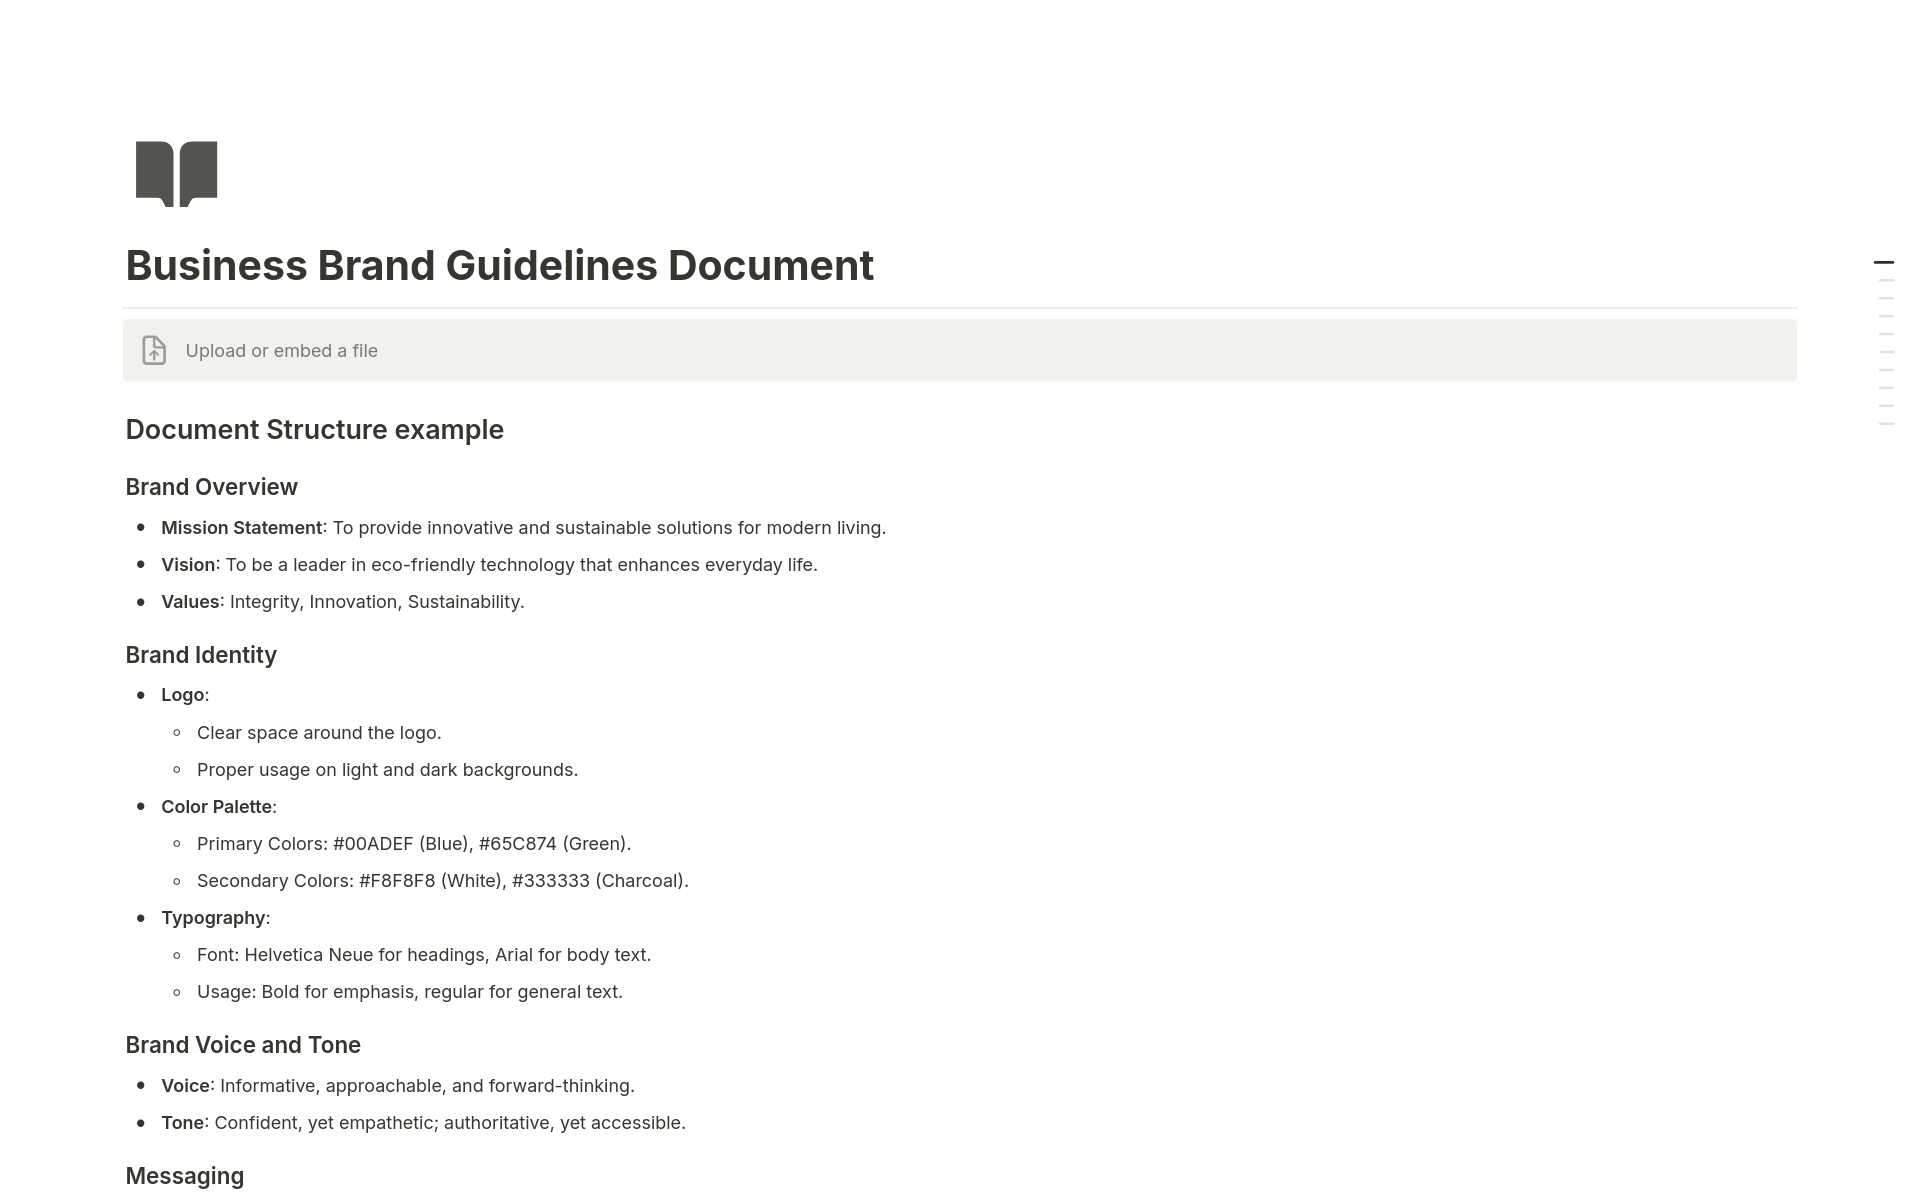 The Notion Brand Guidelines Document Template is a defines the structure to help businesses establish clear and consistent guidelines for their brand identity.